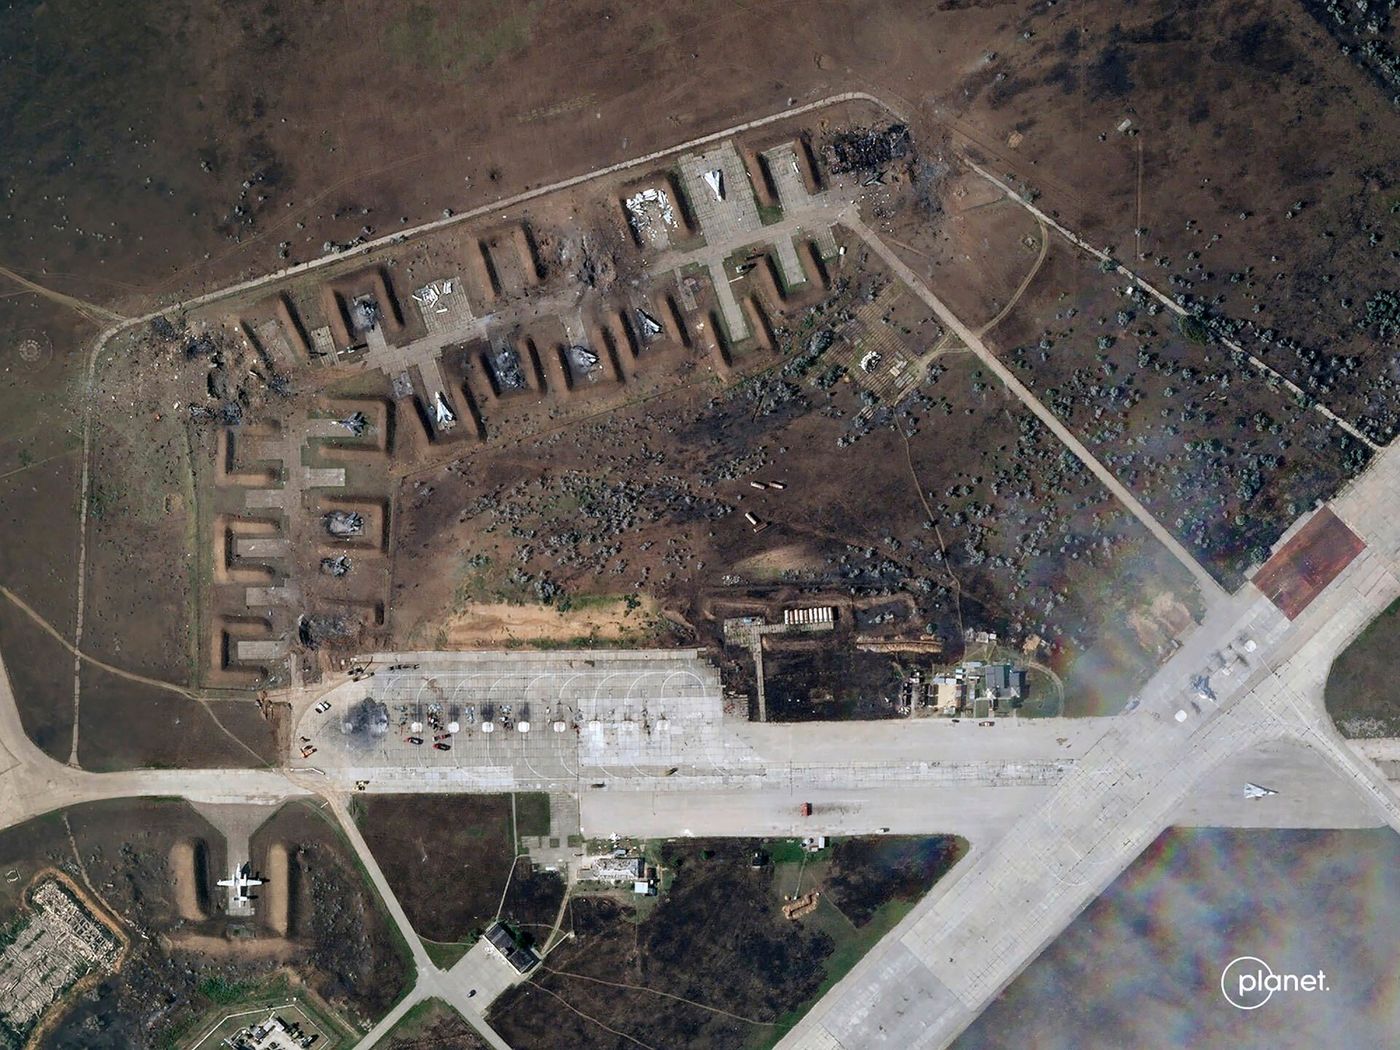 This satellite image of a military air port in Crimea shows significant damage to the main building and some outbuildings and several protective bunkers for fighter jets. The two runways have scattered debris but little damage.